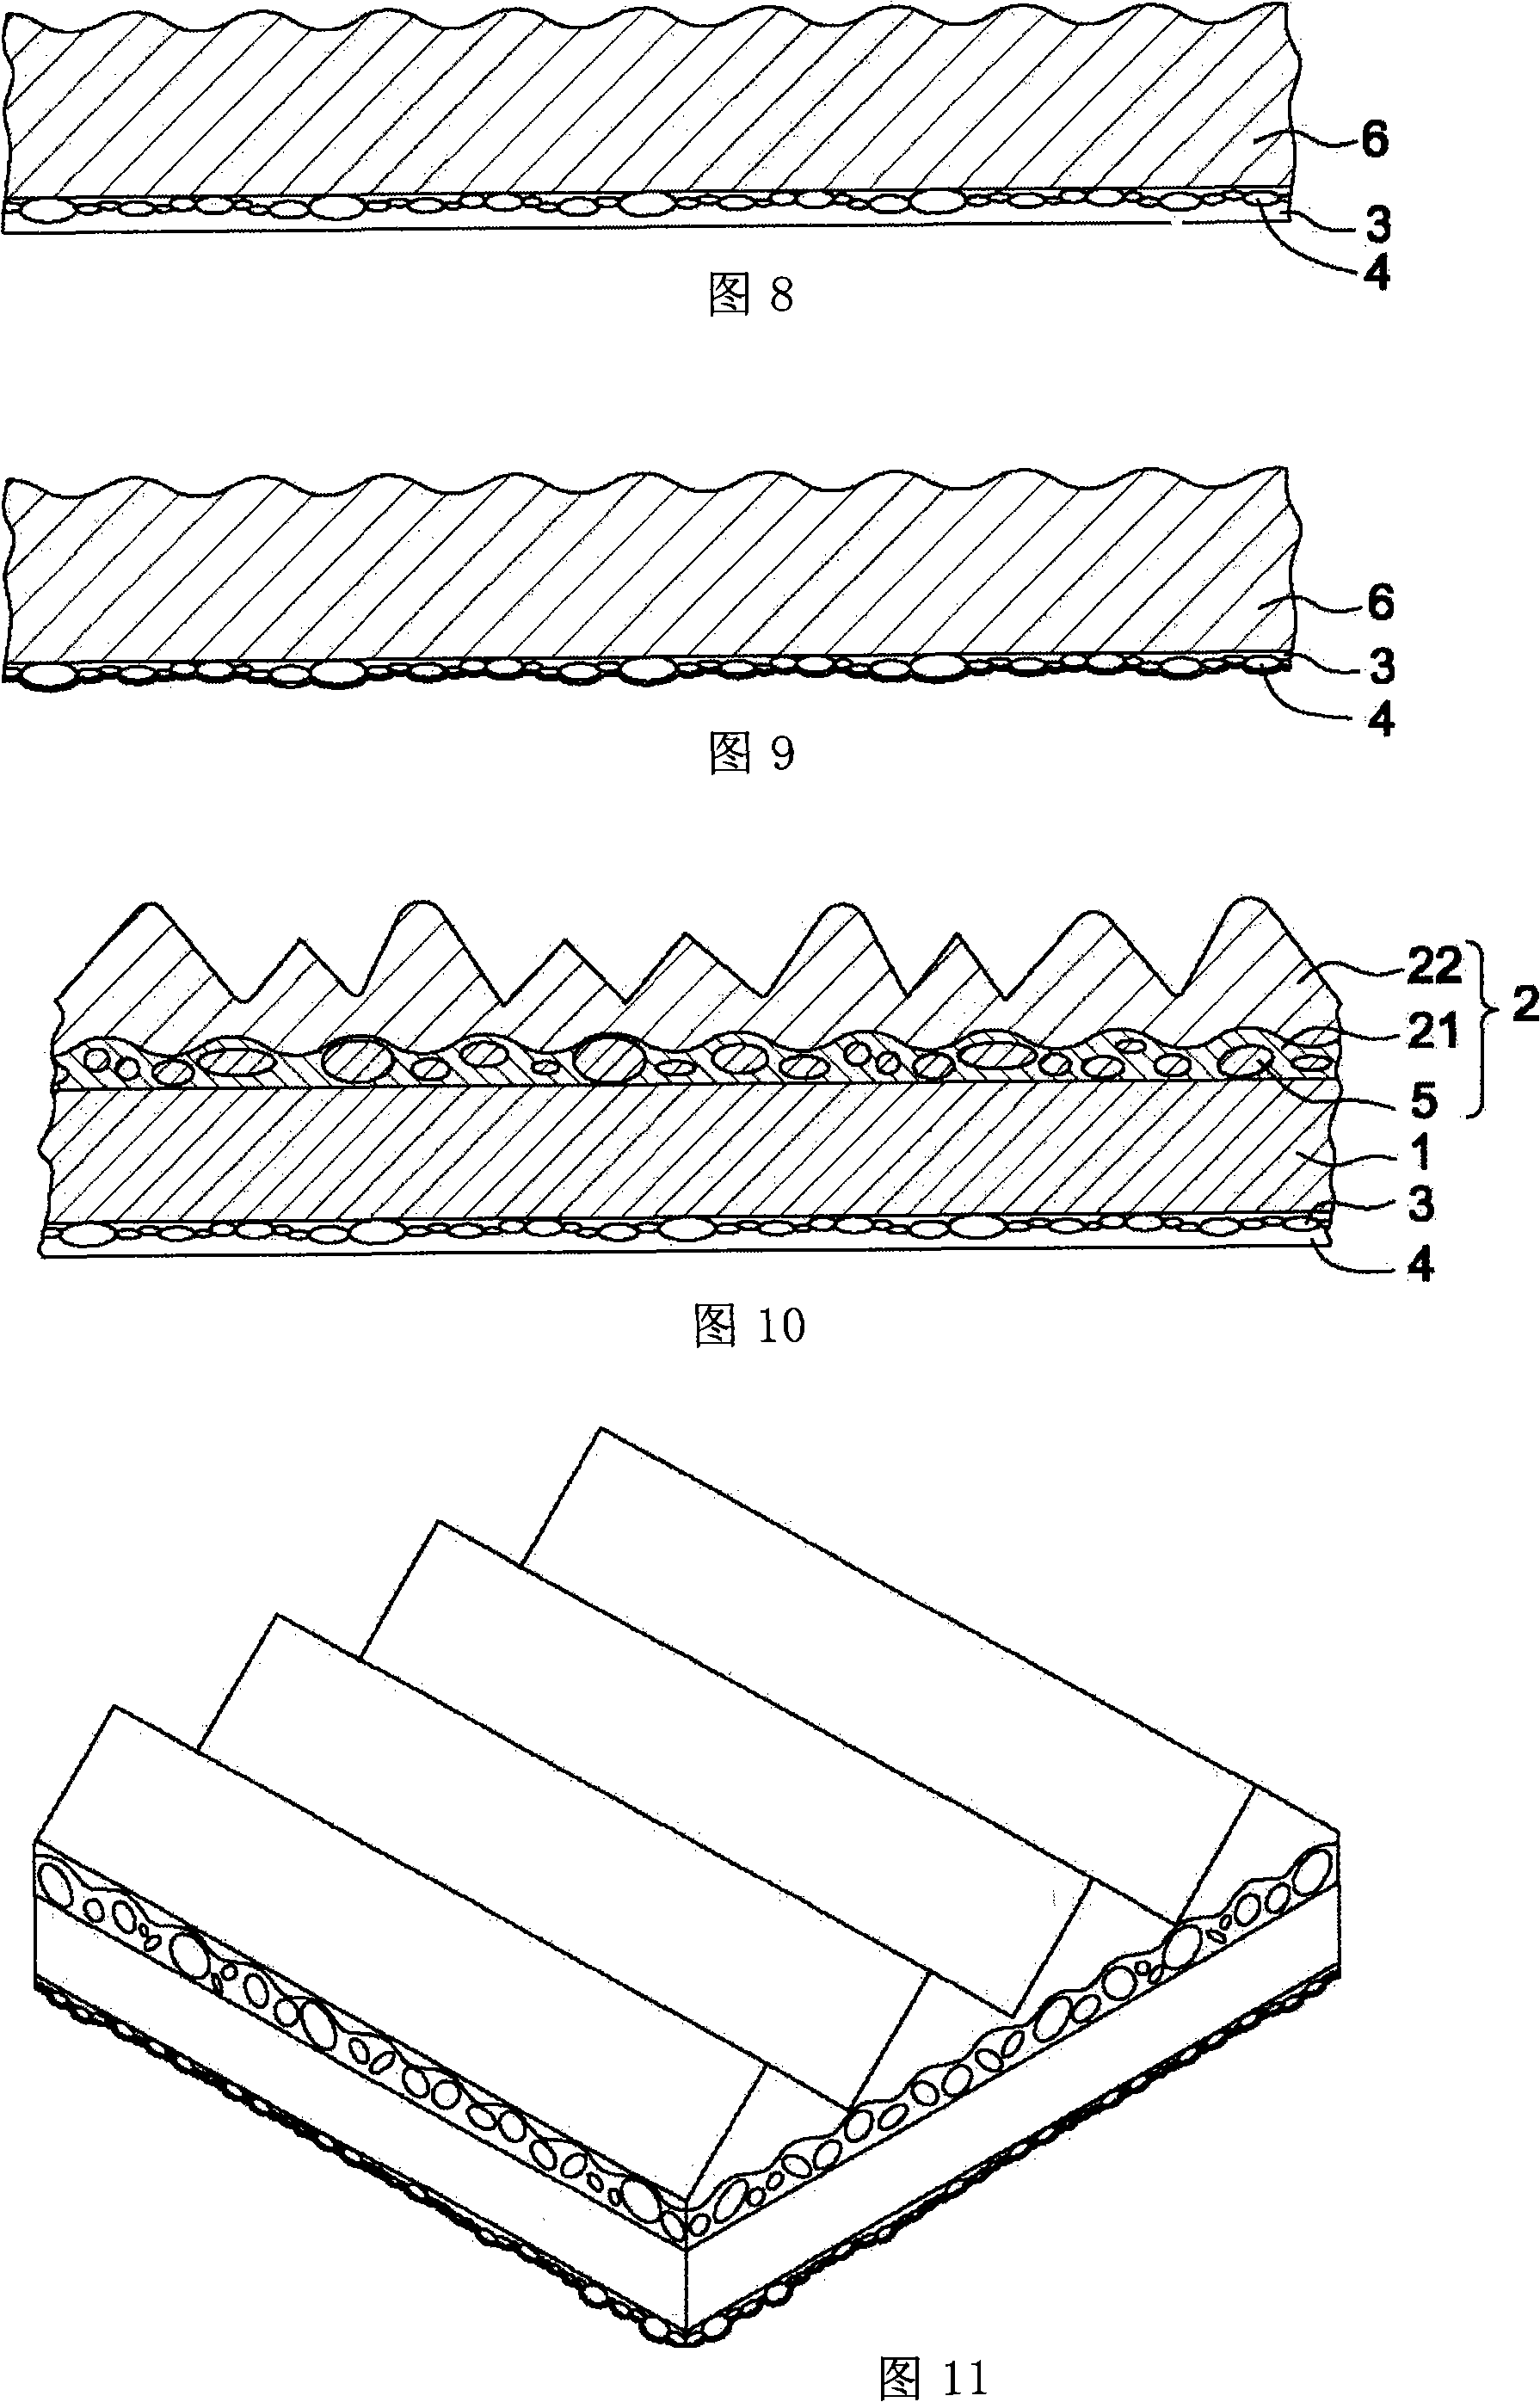 Optical thin film with non-spherical particle